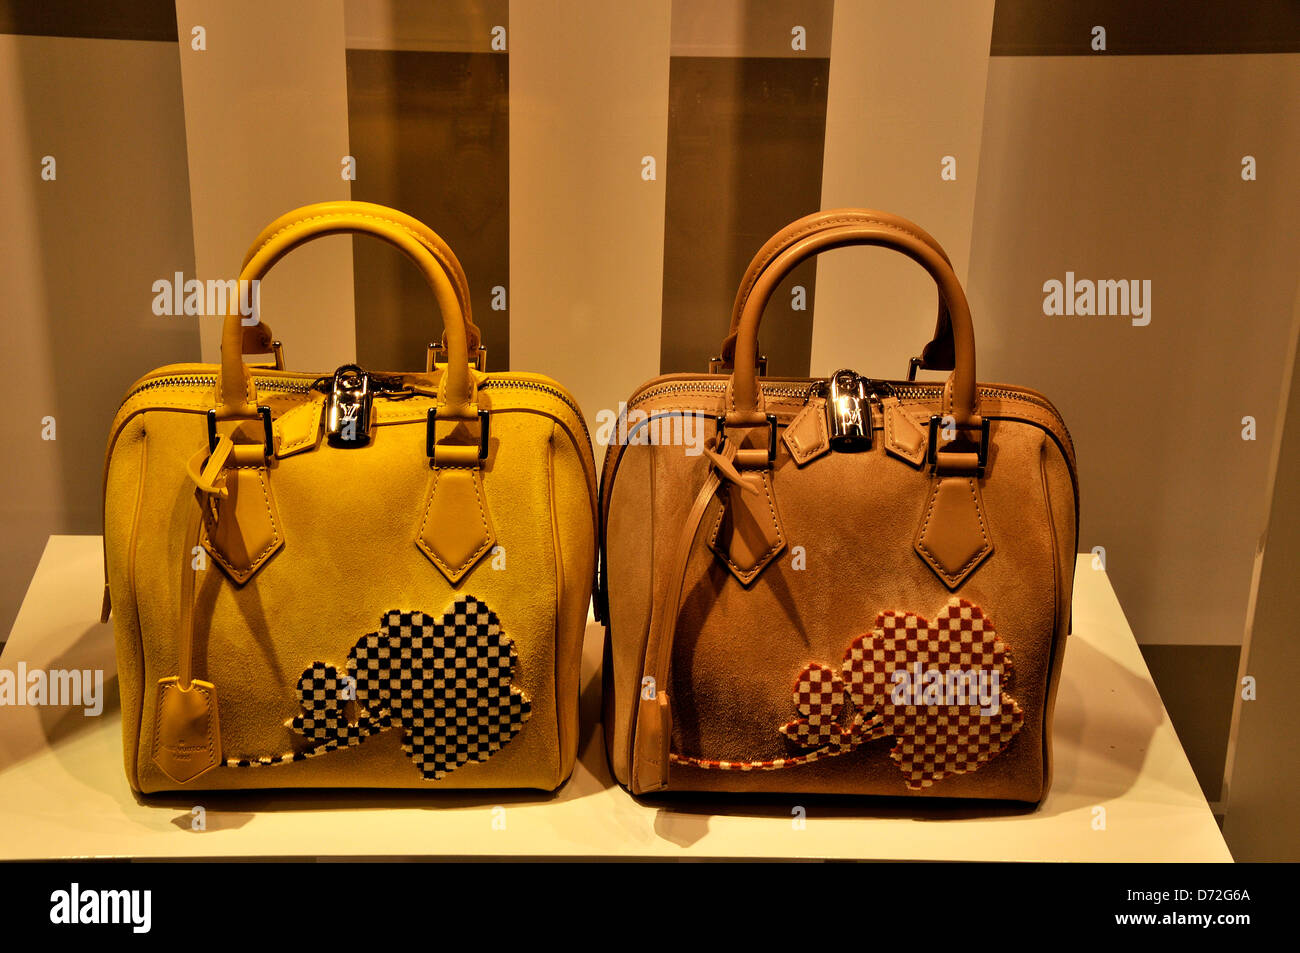 Louis Vuitton woman hand bag in the window of LV boutique in Dubai